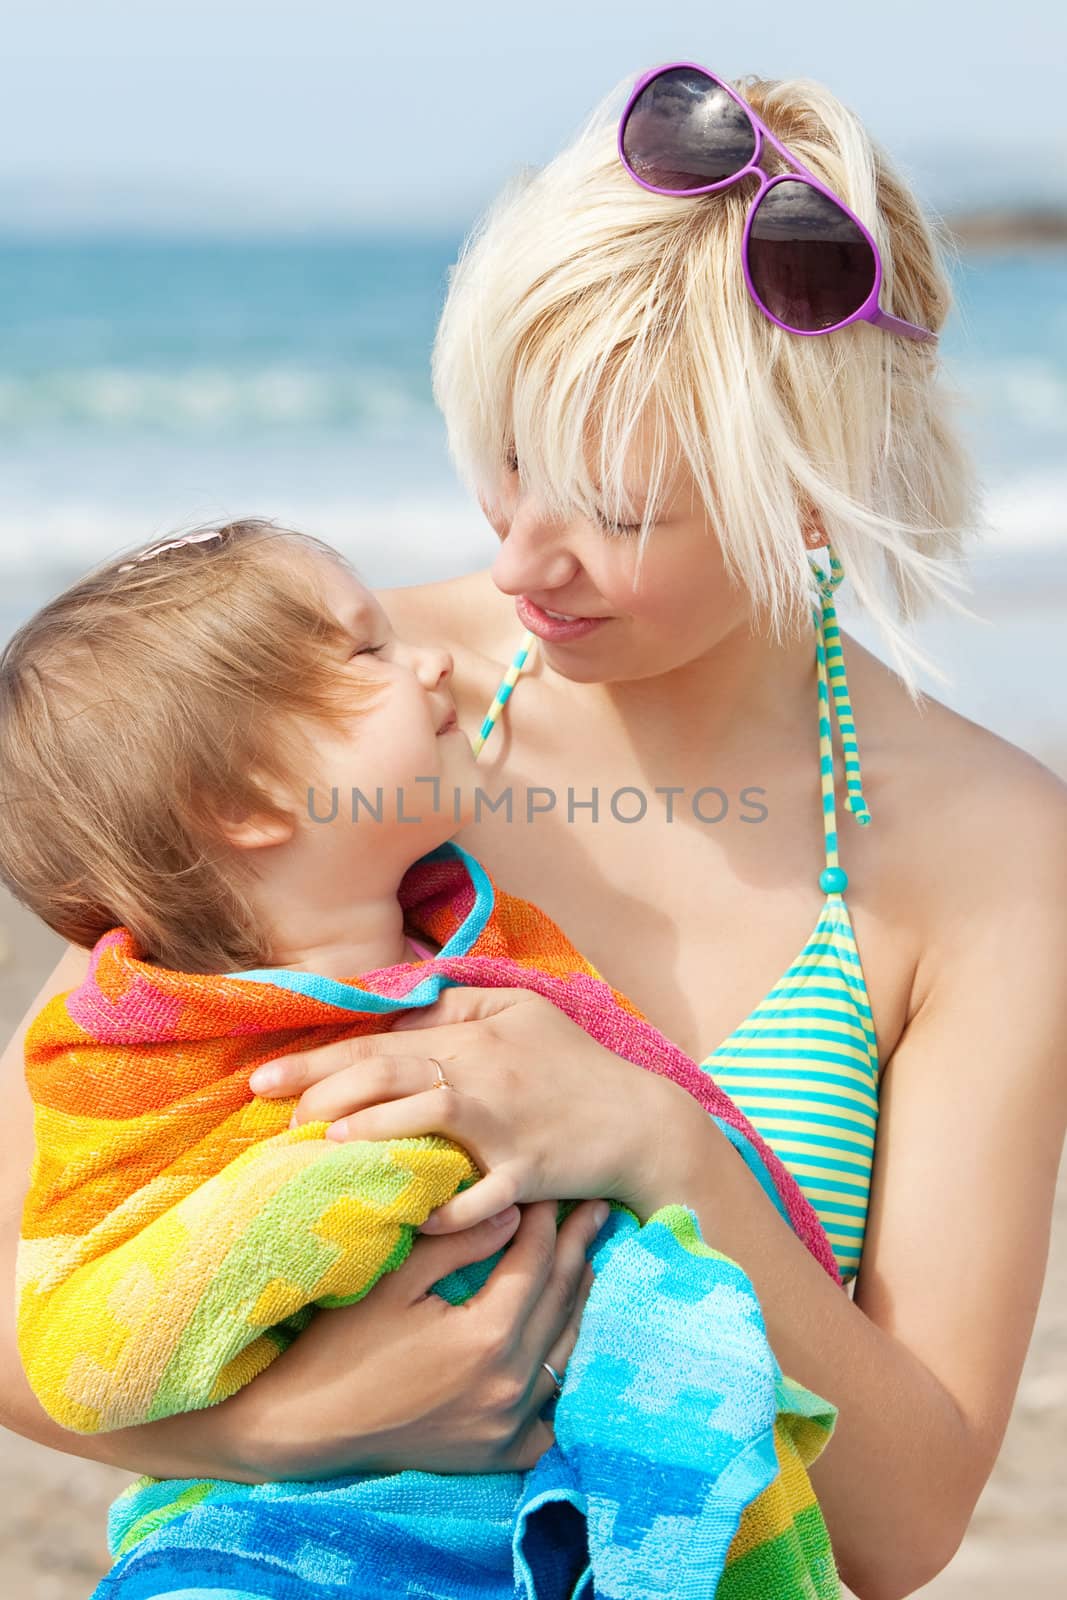 A portrait of a smiling girl in a towel in the arms of her mothe by Wavebreakmedia